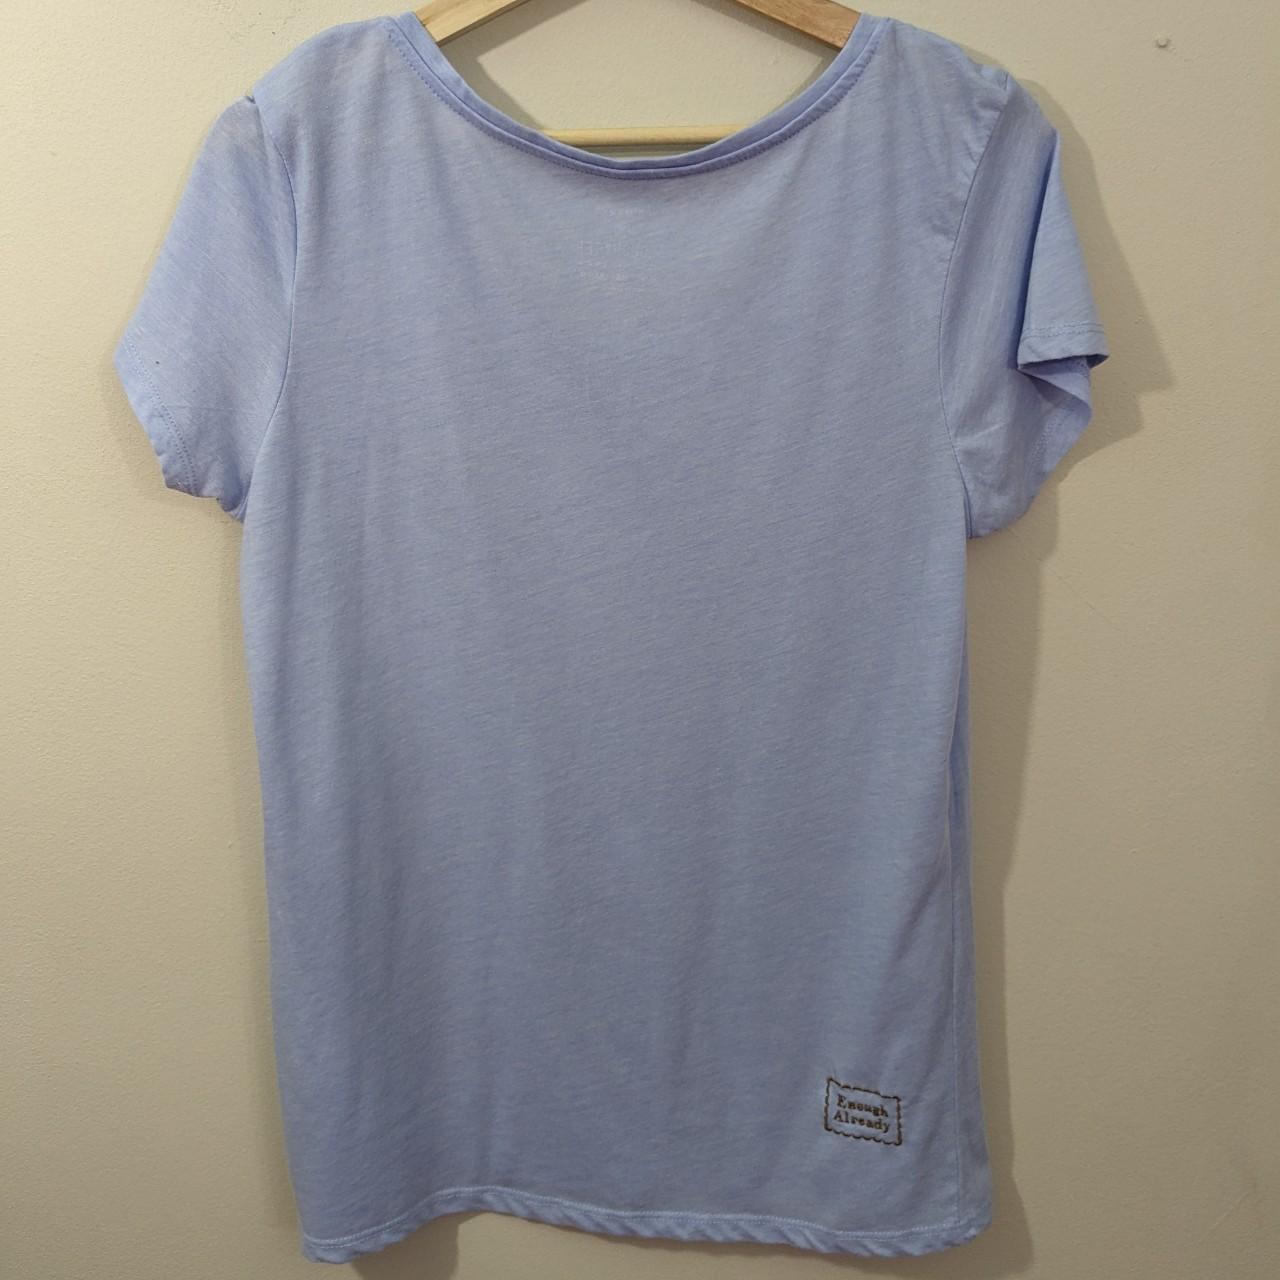 Size 10-12 Powder Blue Up-cycled Tee - Embroidered Virginia Woolf Line Drawing